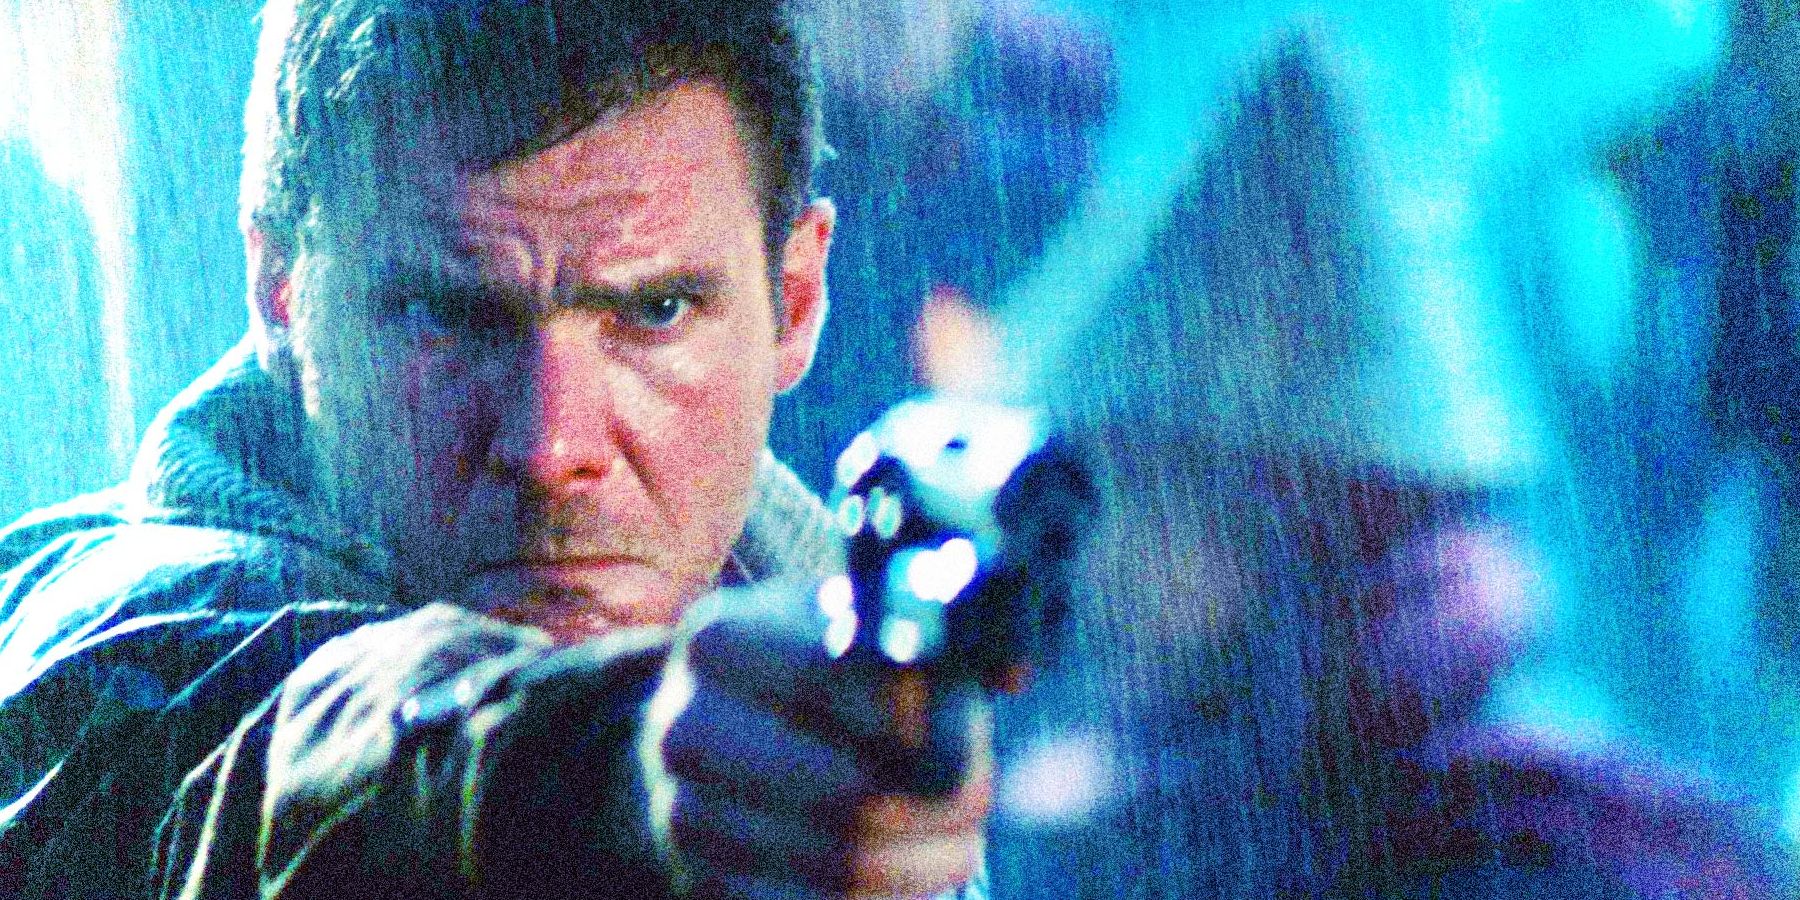 Blade Runner Harrison Ford aiming his pistol in the 1982 movie